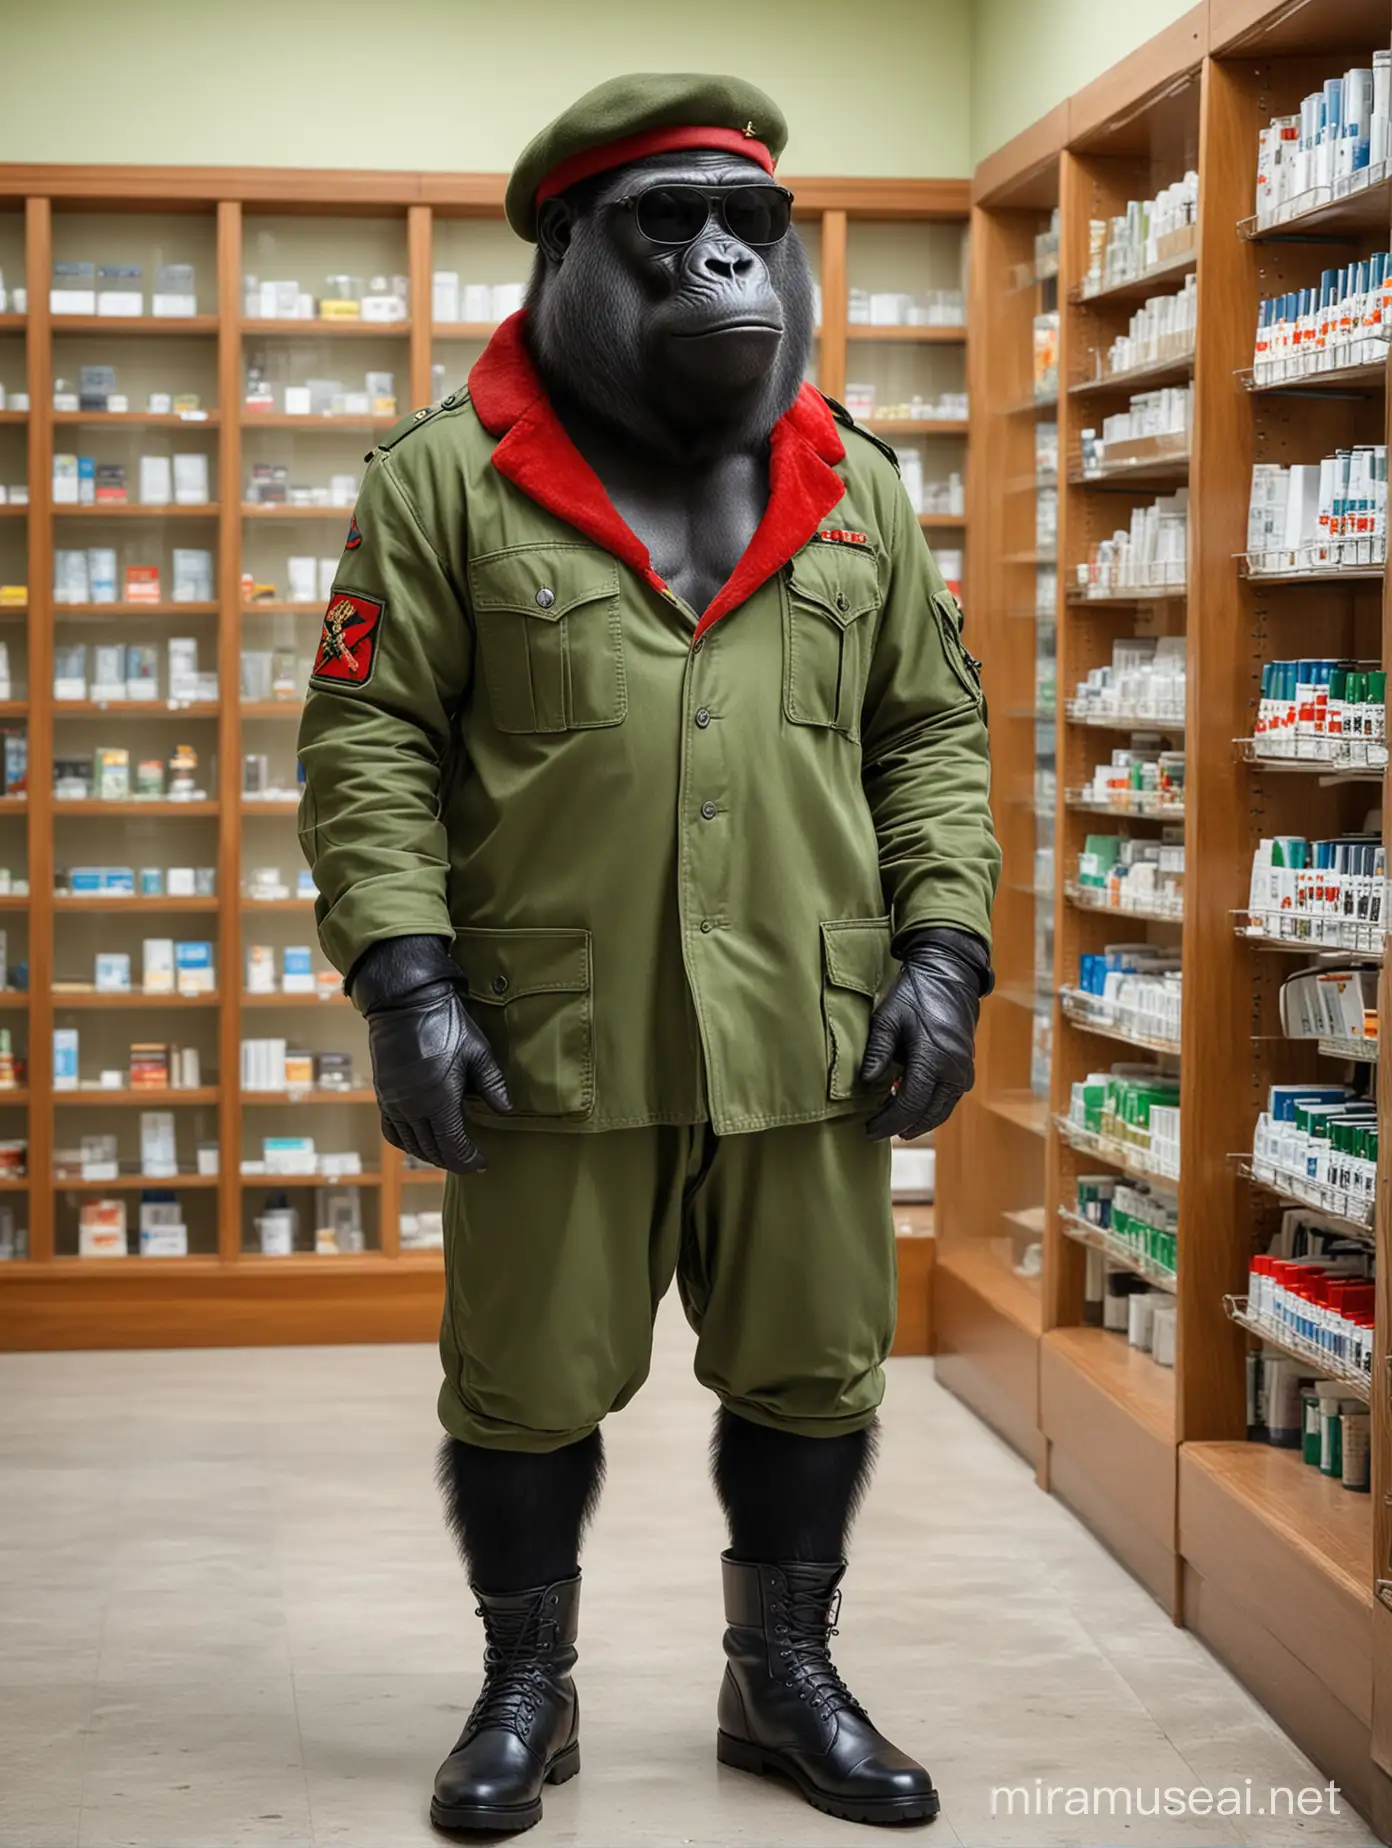 Military General Gorilla in Pharmacy with Red Beret and Sunglasses